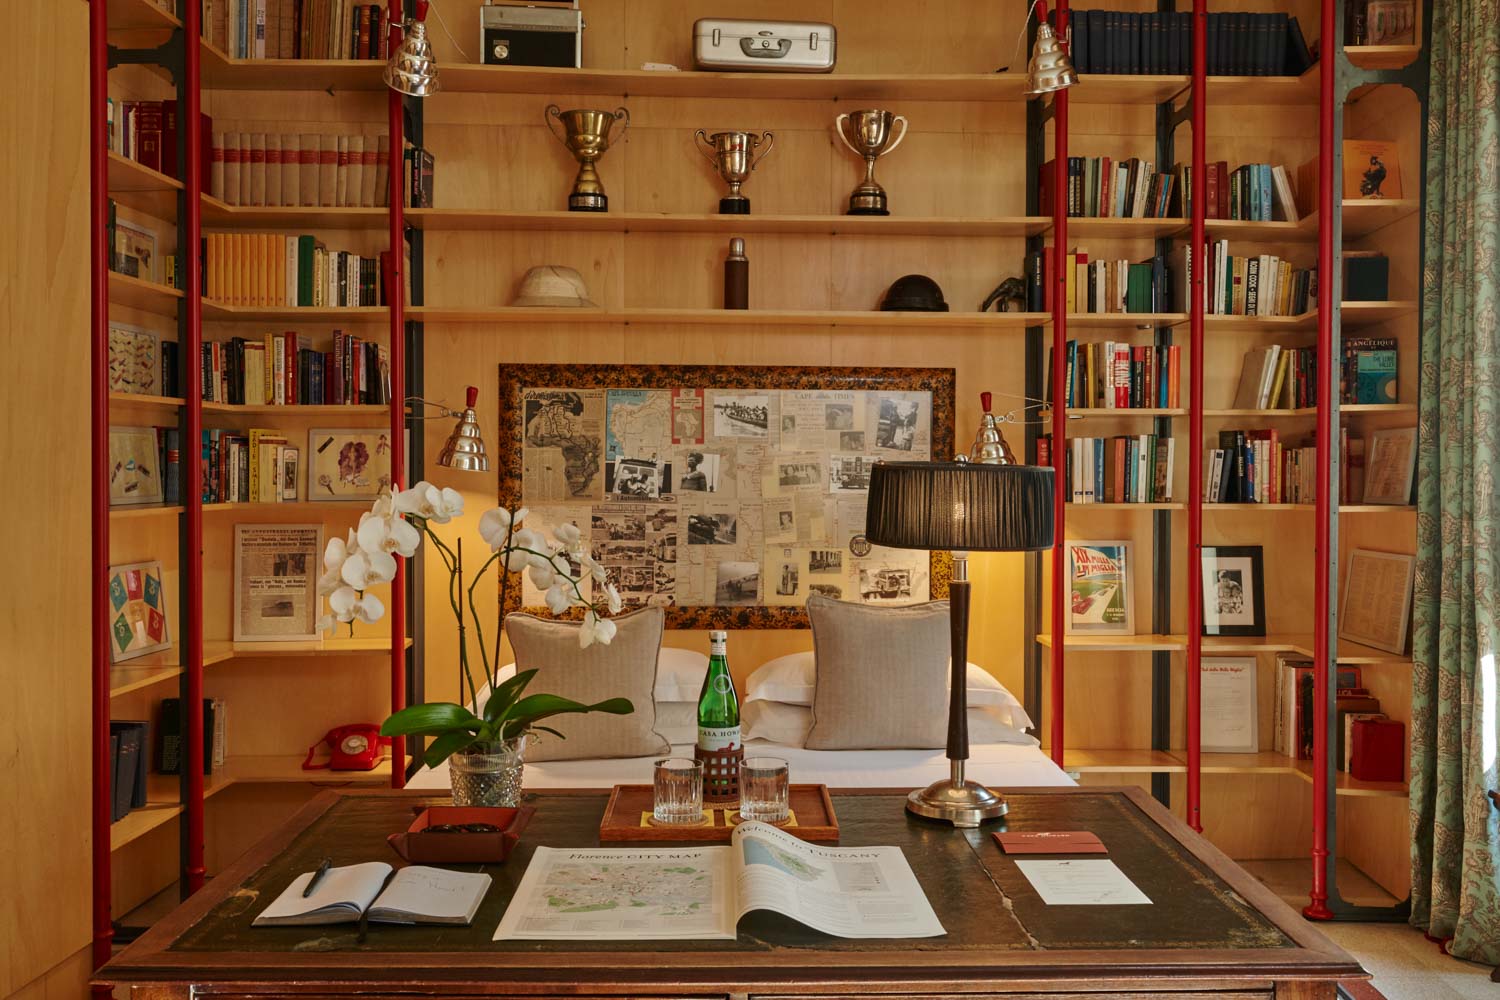 Casa Howard Firenze Residenza d’Epoca And to my favorite room in the Casa, a library room